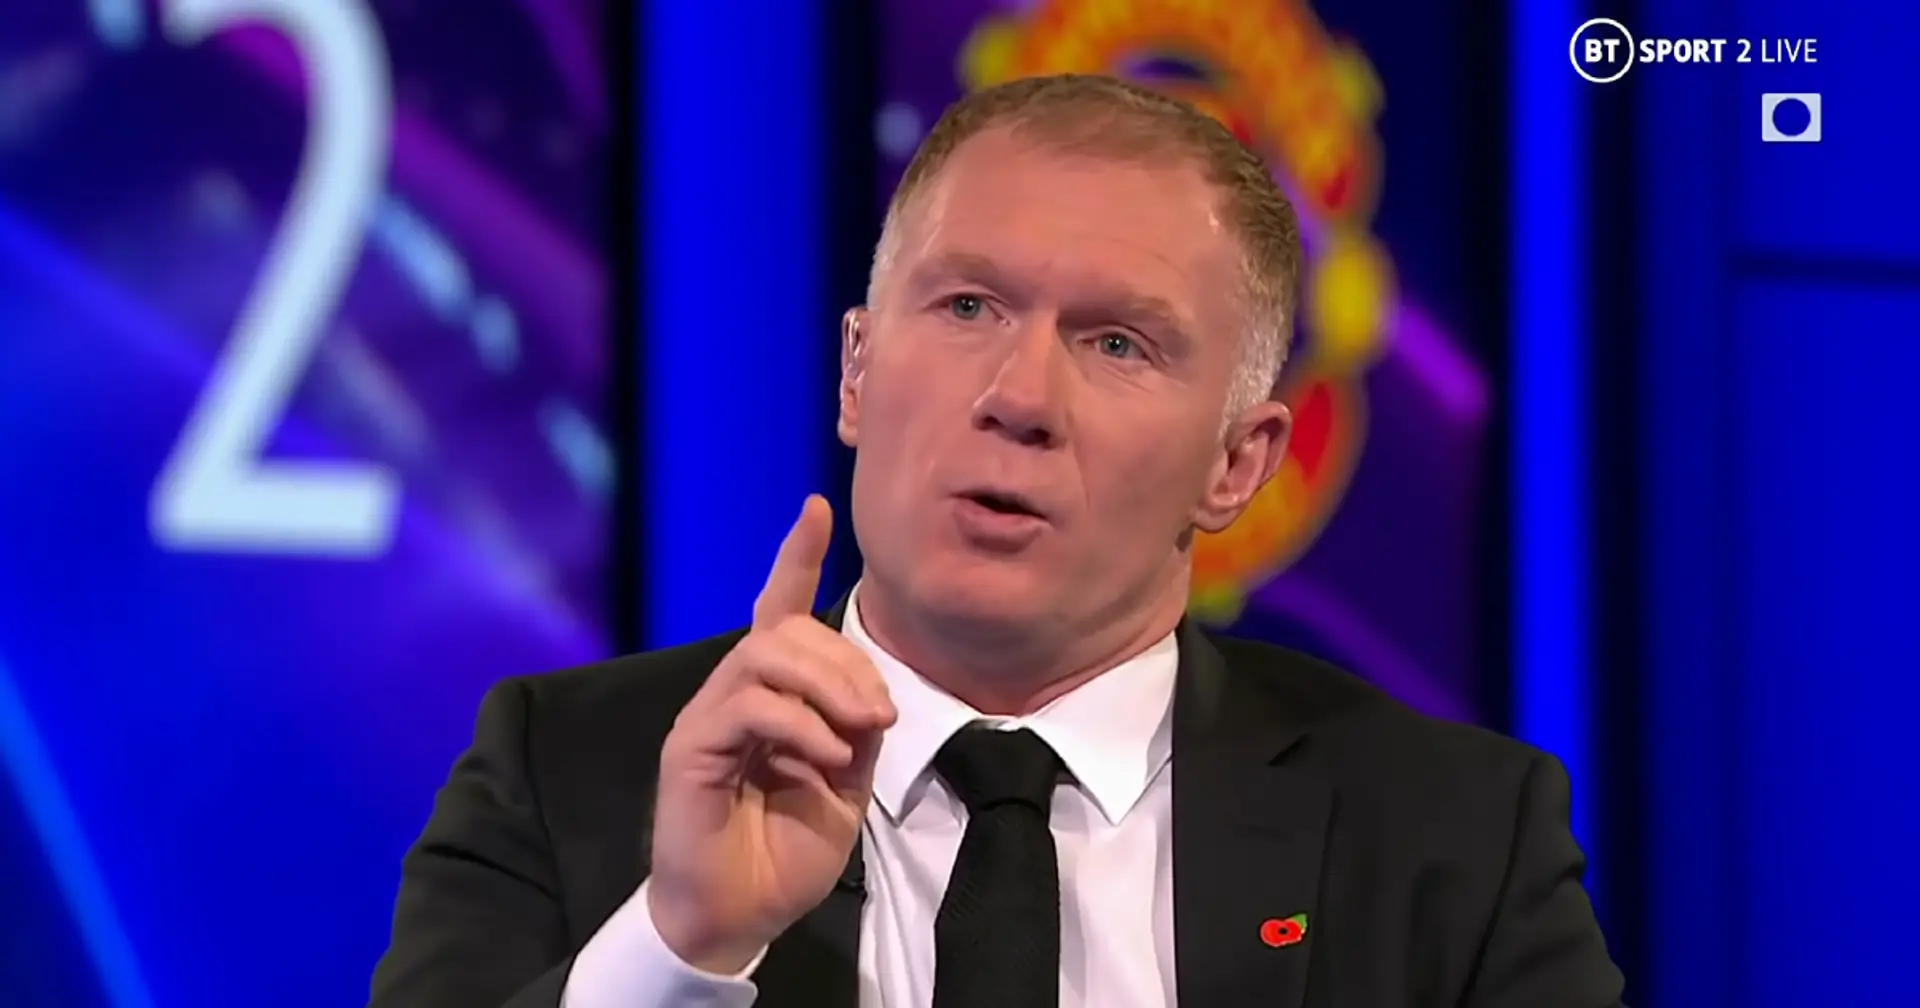 Will Man United finish above Spurs and Villa? Paul Scholes shares his prediction